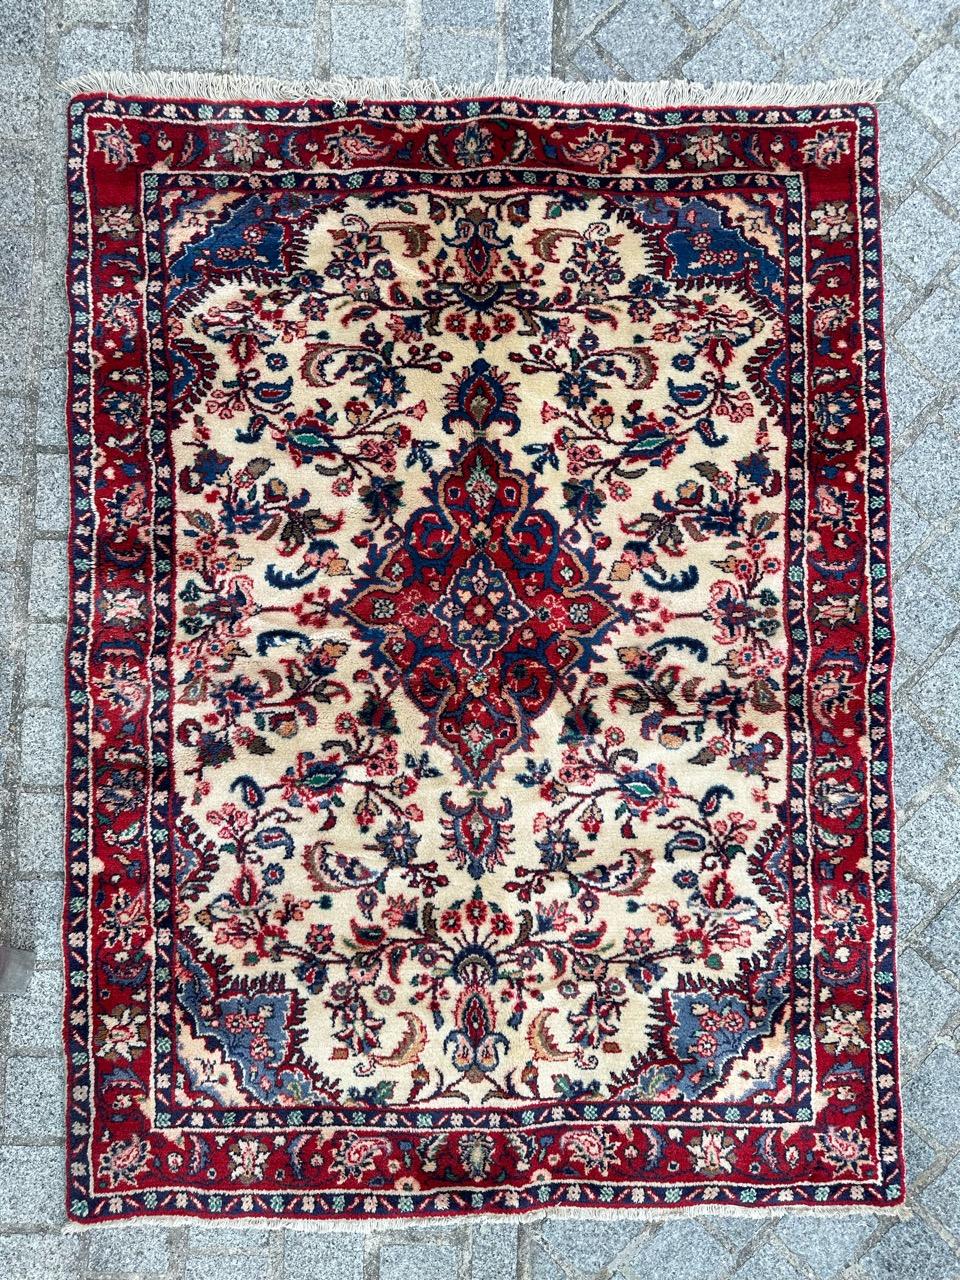 Beautiful vintage Najaf Abad rug entirely hand knotted with wool velvet on cotton foundation.
Introducing our exquisite vintage rug from the 1980s, featuring a central floral medallion design that encapsulates the timeless elegance of that era. The